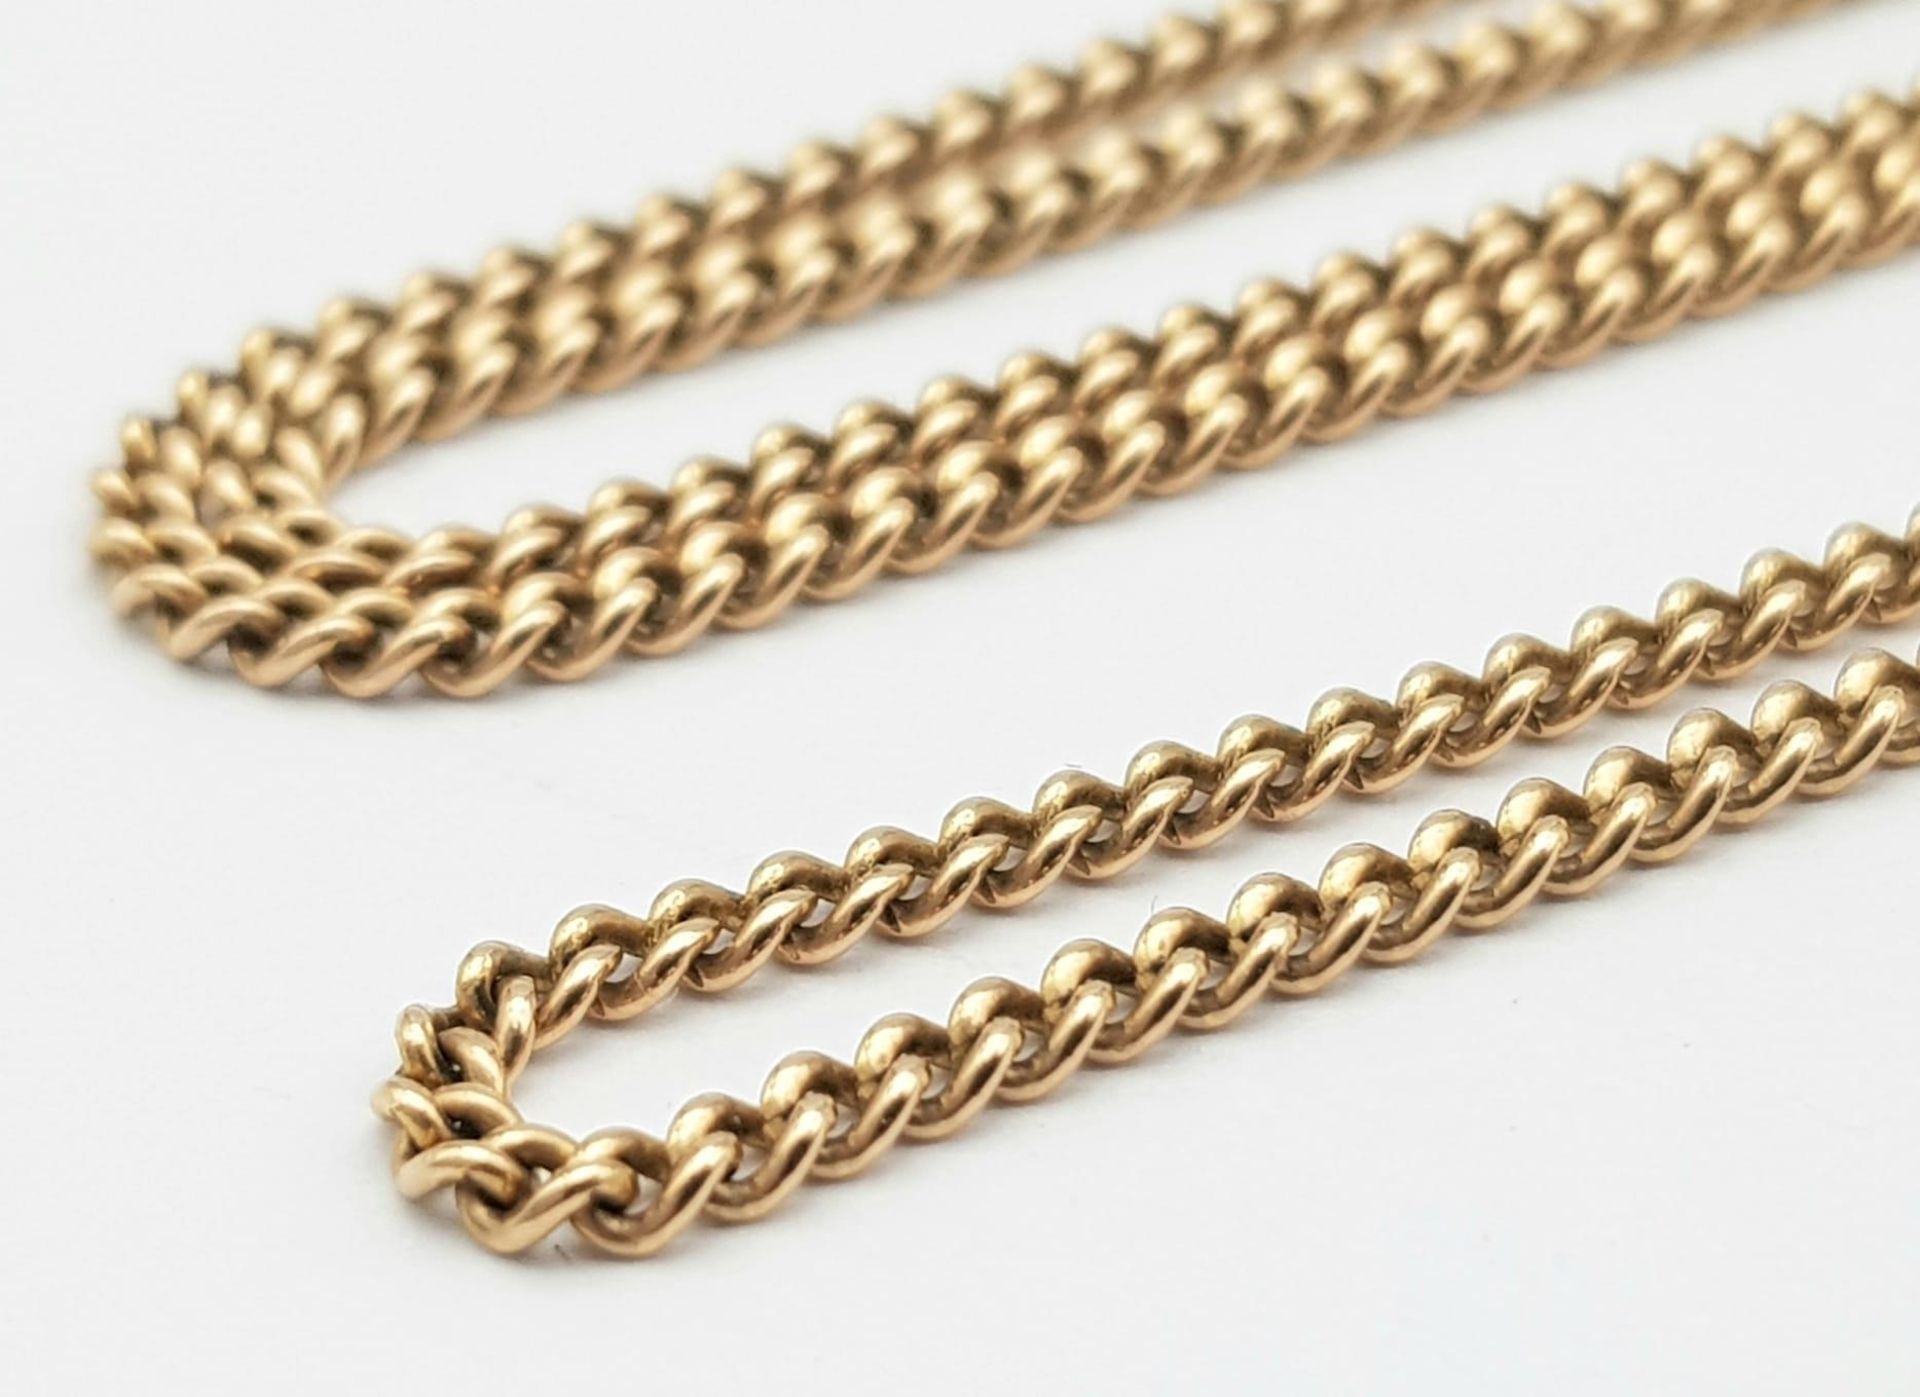 A Vintage 9K Yellow Gold Small Curb Link Chain/Necklace. 64cm length. 8.25g weight. - Image 3 of 4